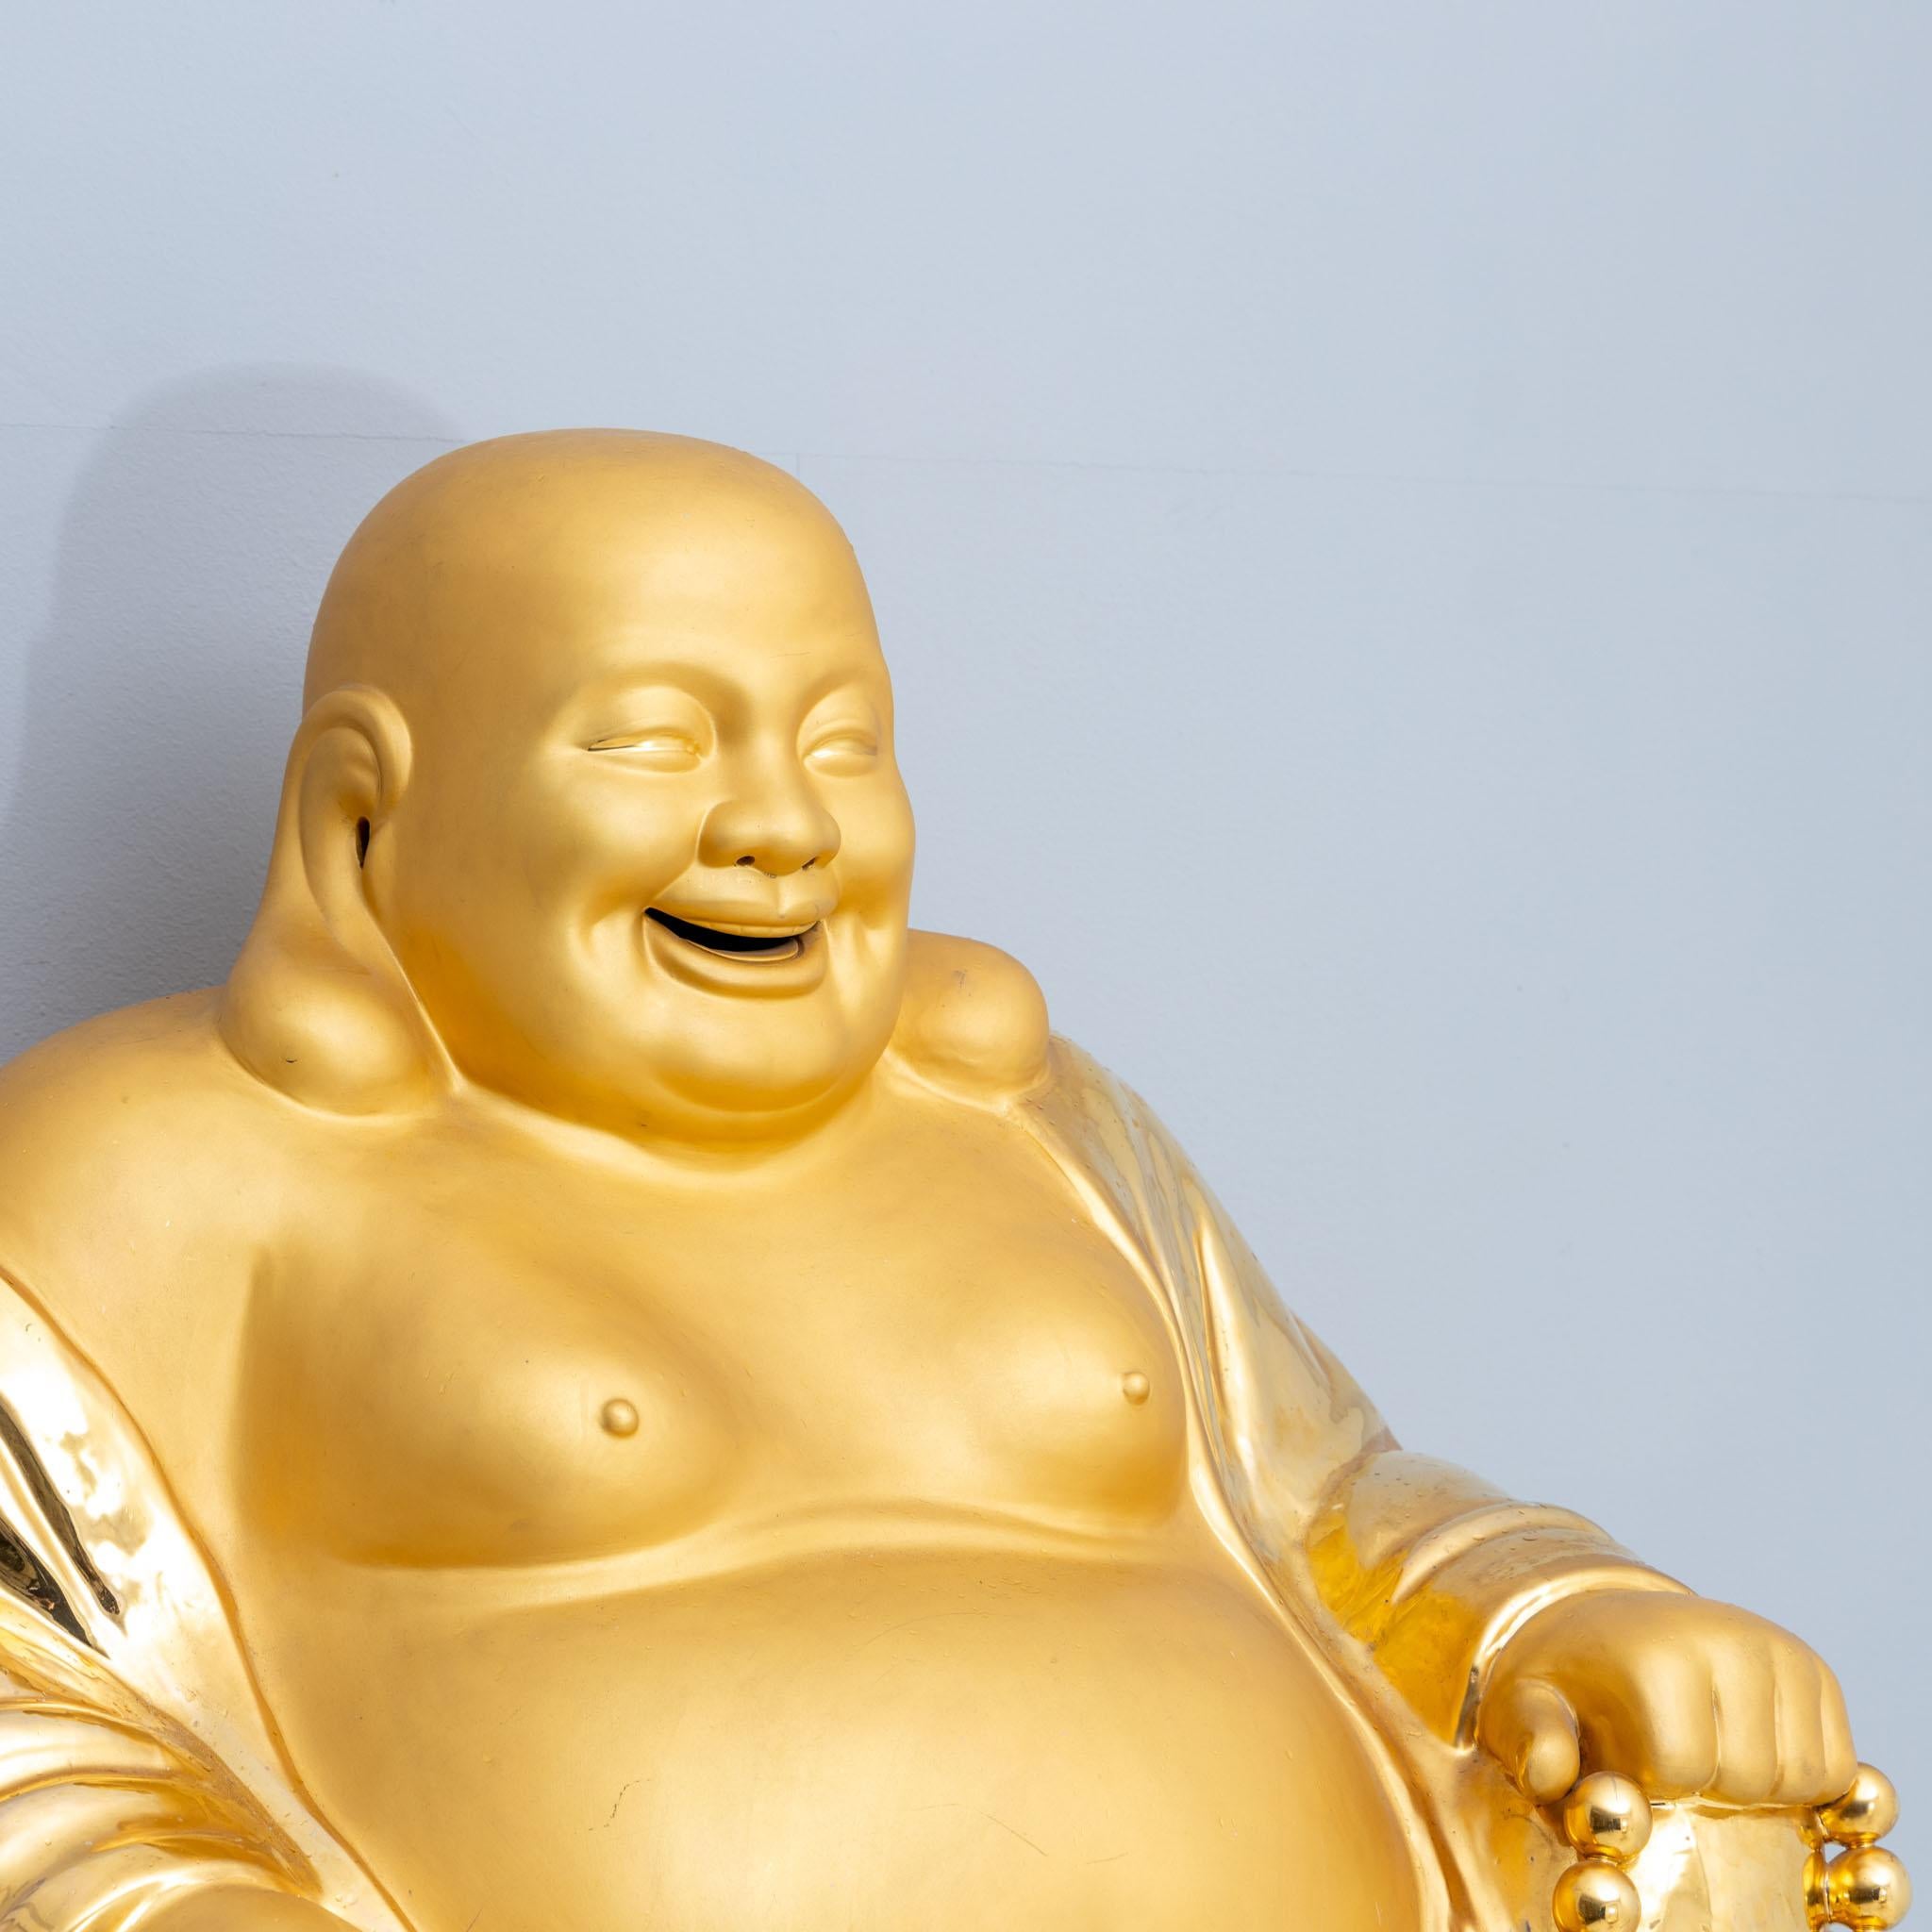 Golden Laughing Buddha Made of Porcelain, 20th Century In Good Condition For Sale In Greding, DE